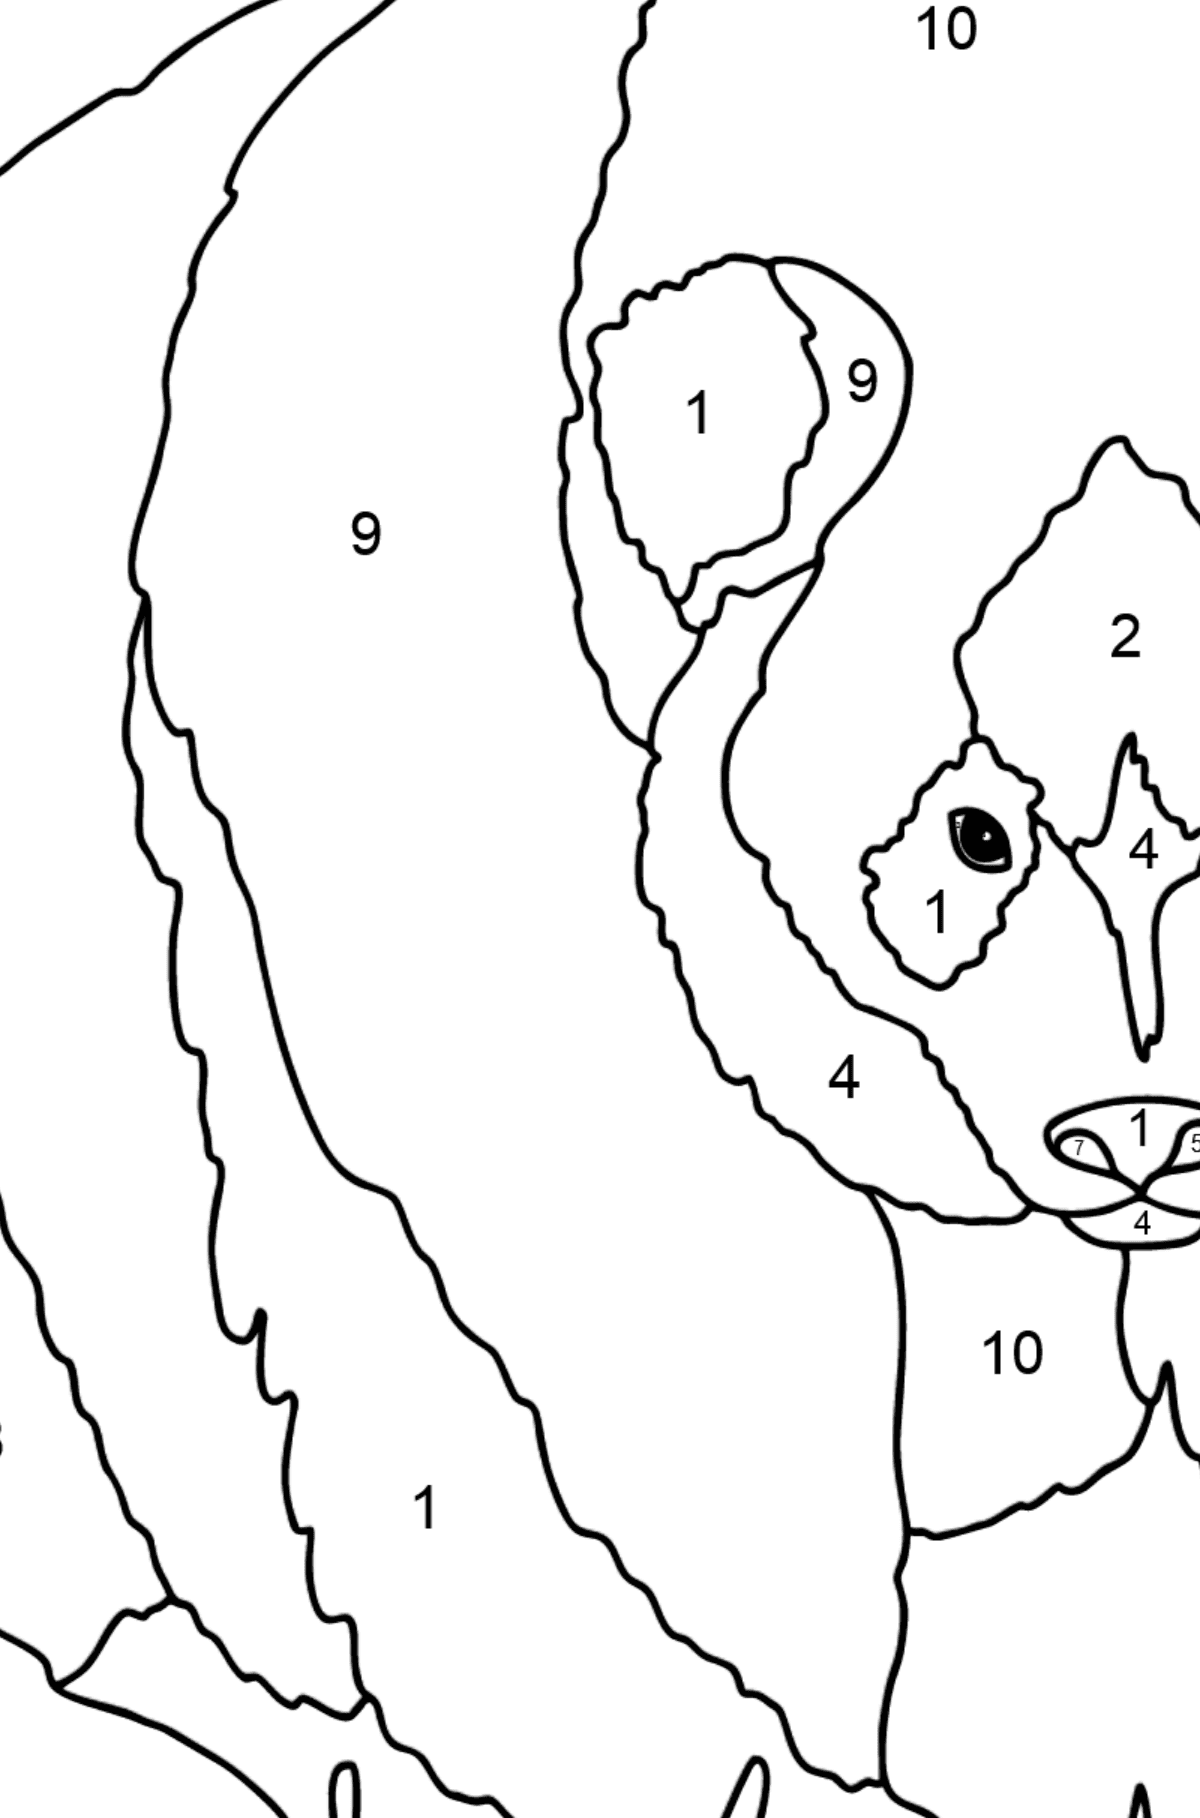 Coloring Page - A Panda is on a Hunt - Coloring by Numbers for Kids